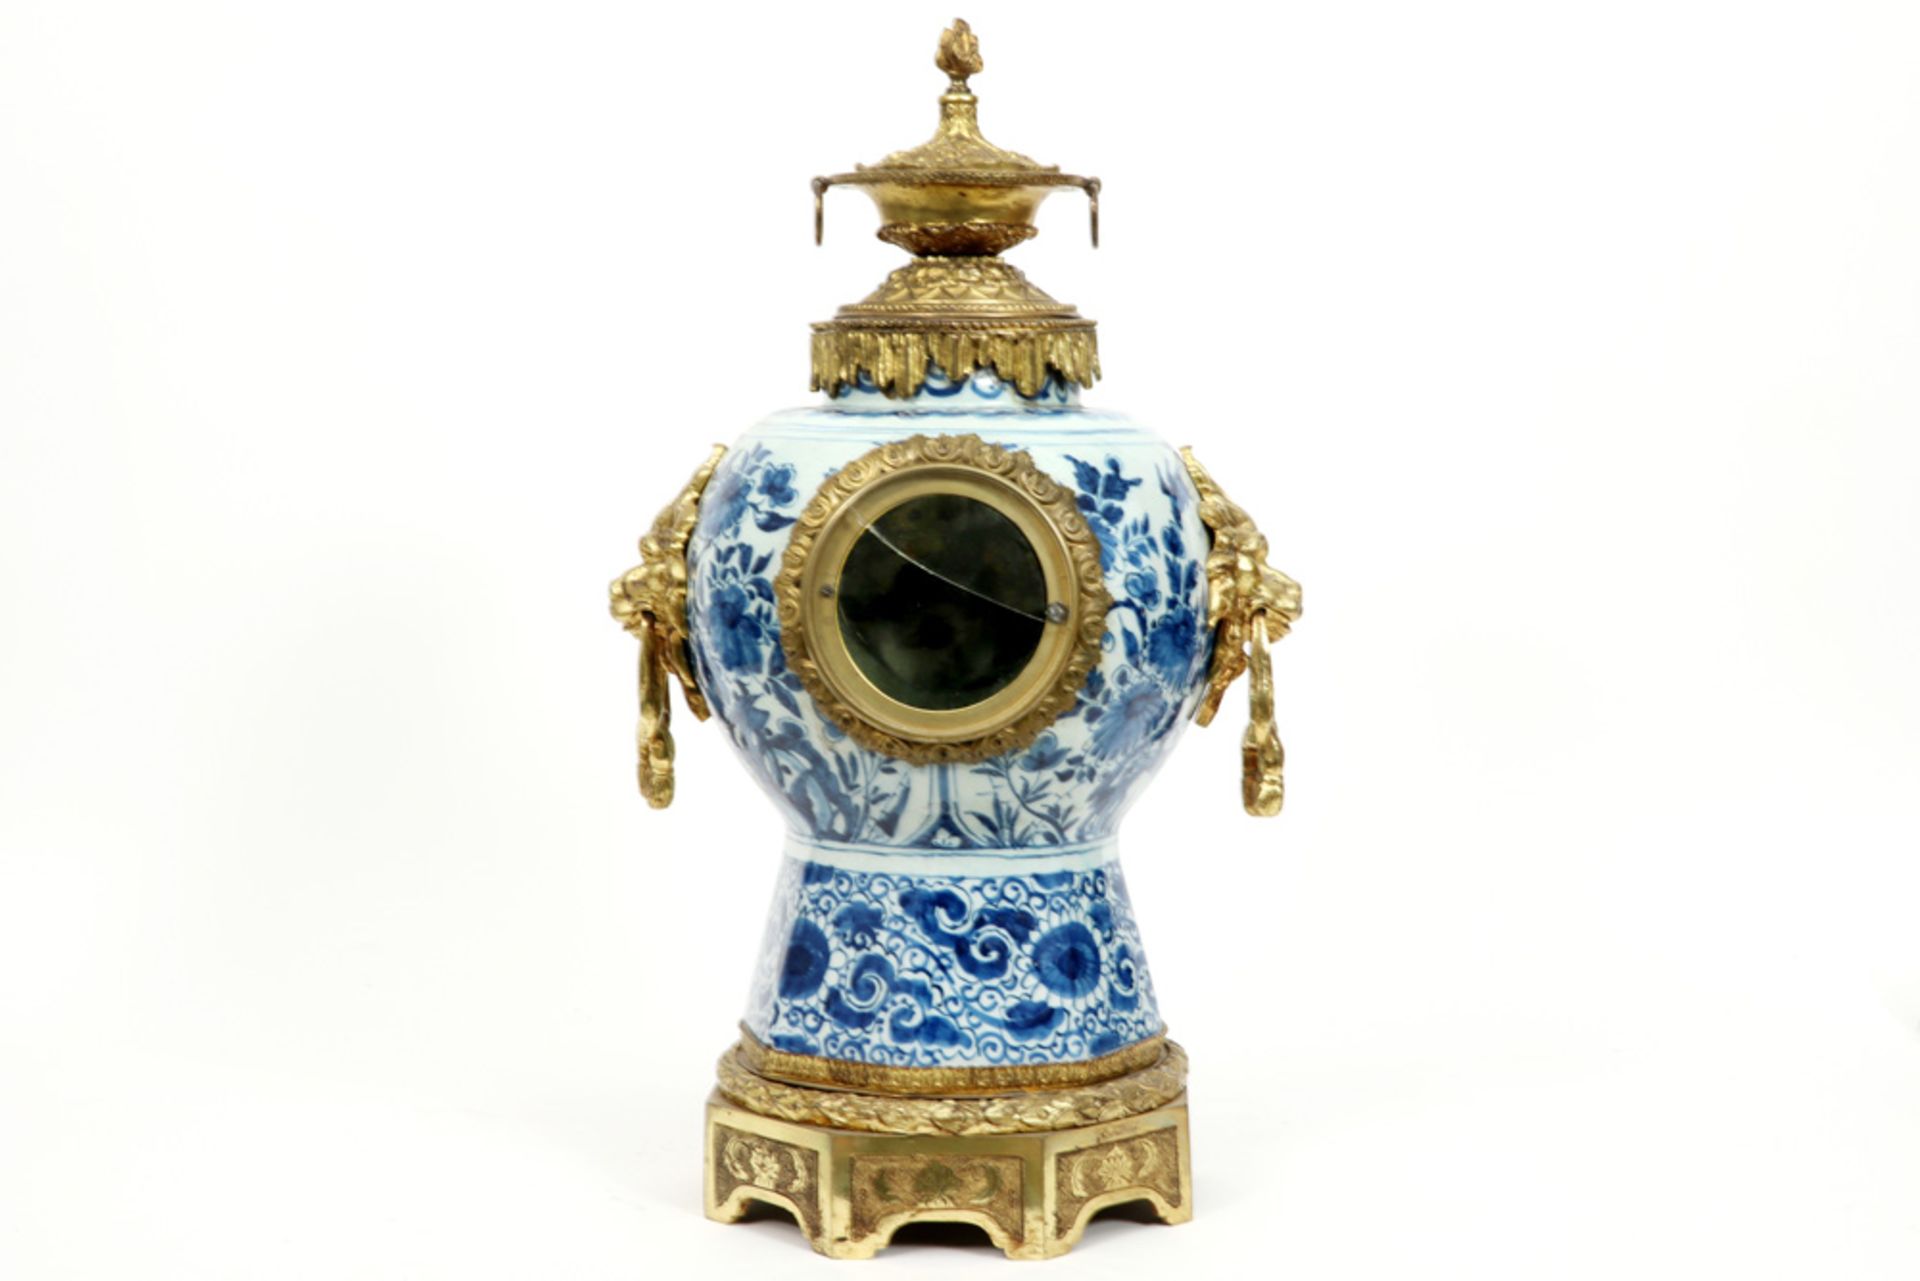 19th Cent. clock with an 18th Cent. Delft ceramic vase with blue-white decor and with mountings in g - Image 3 of 3